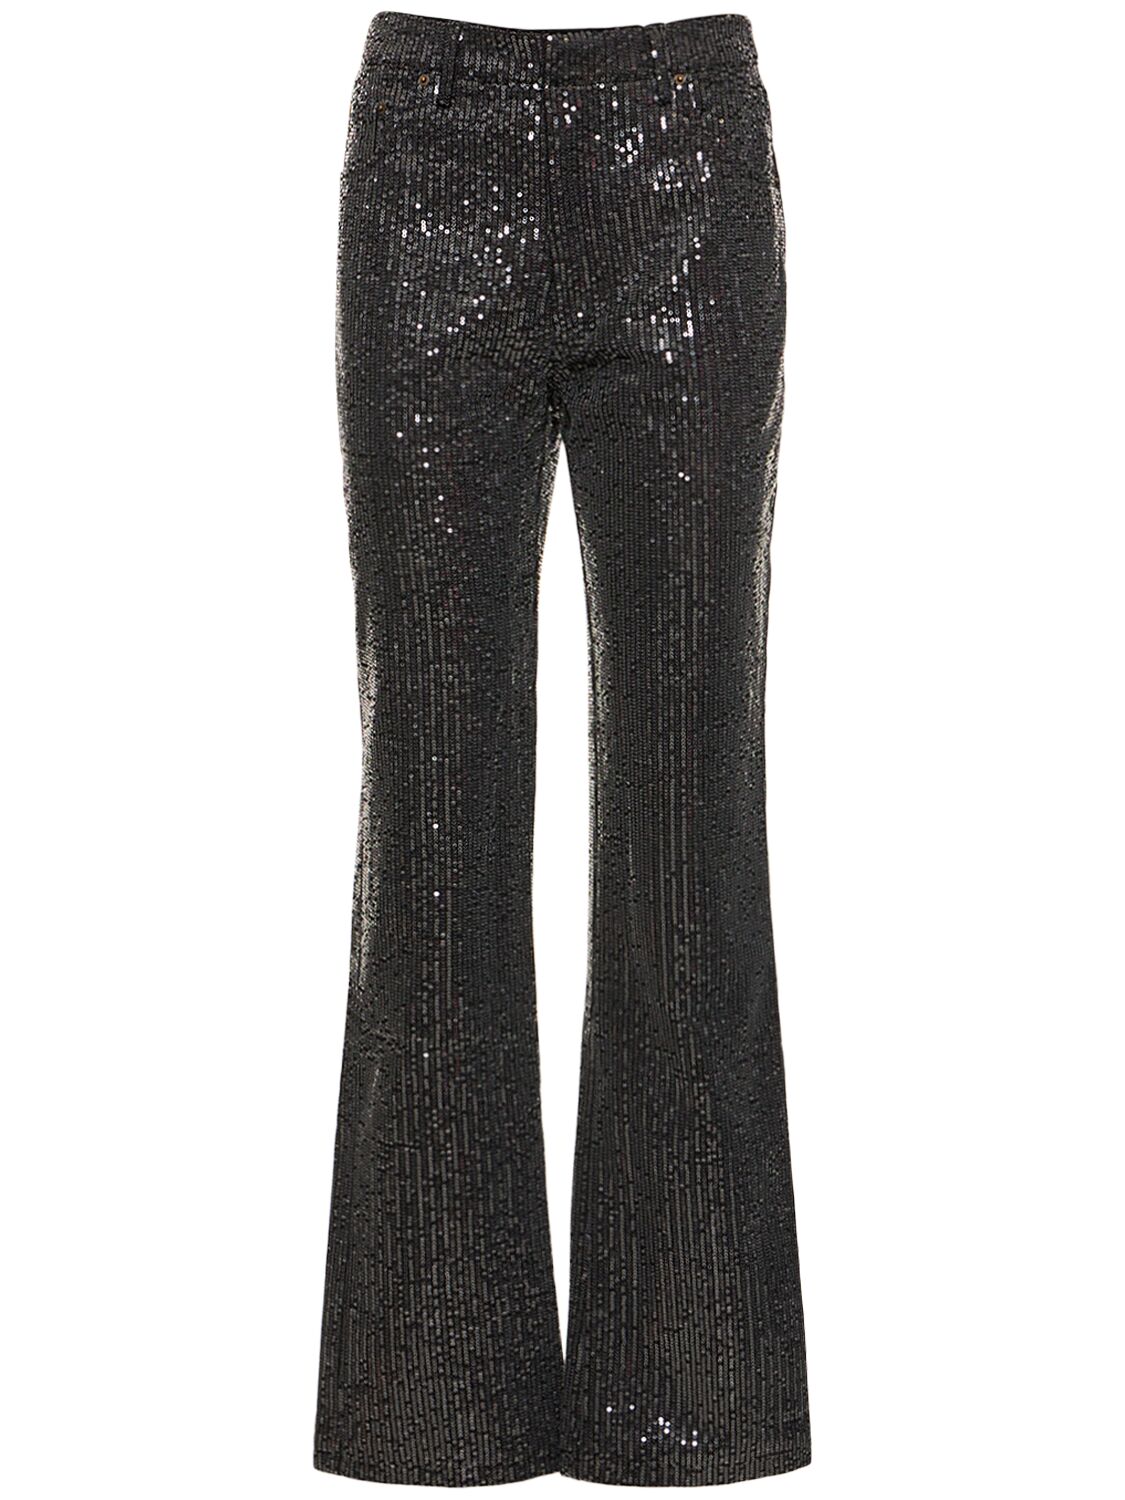 Rotate Birger Christensen Sequined Twill Trousers In Black